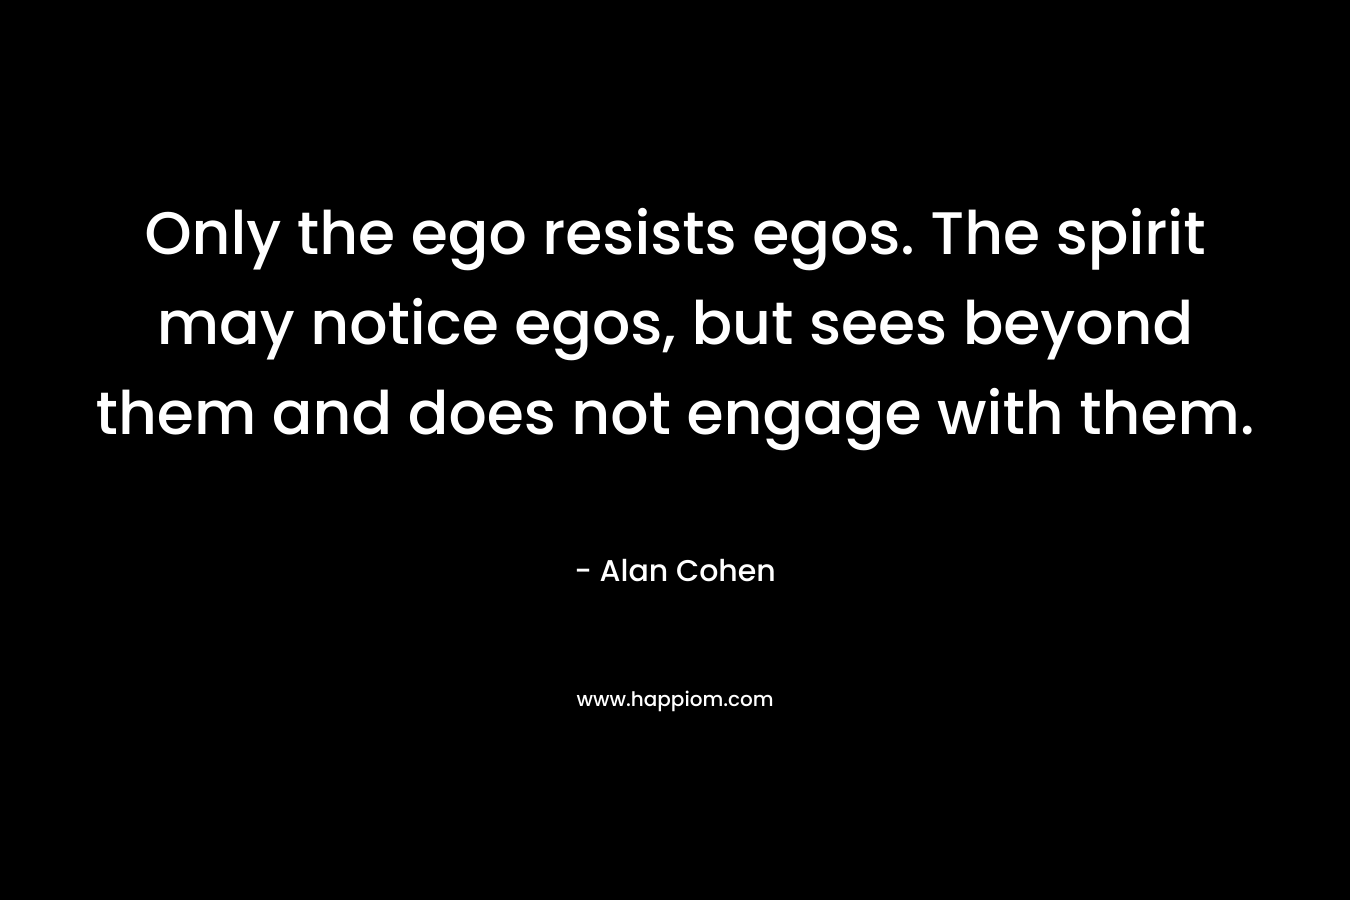 Only the ego resists egos. The spirit may notice egos, but sees beyond them and does not engage with them.